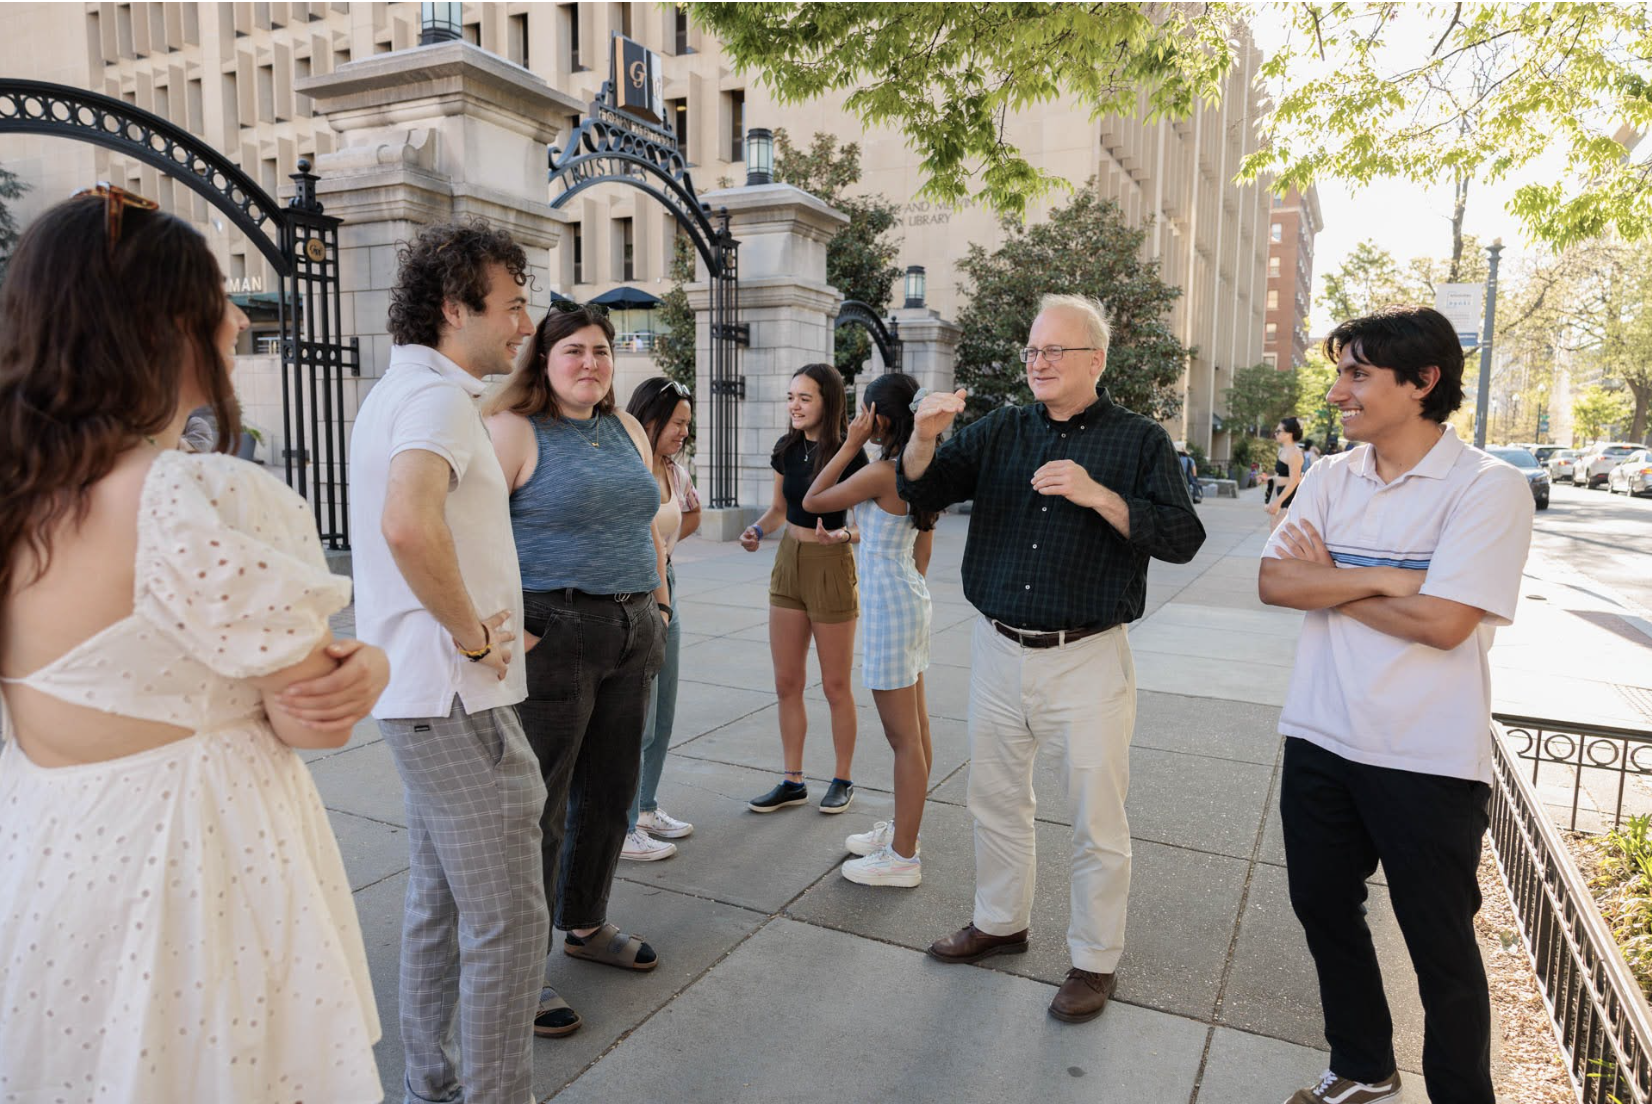 Professor Bob Orttung speaks with members of the fellowship program outside of Professor's Gate on the George Washington University campus.